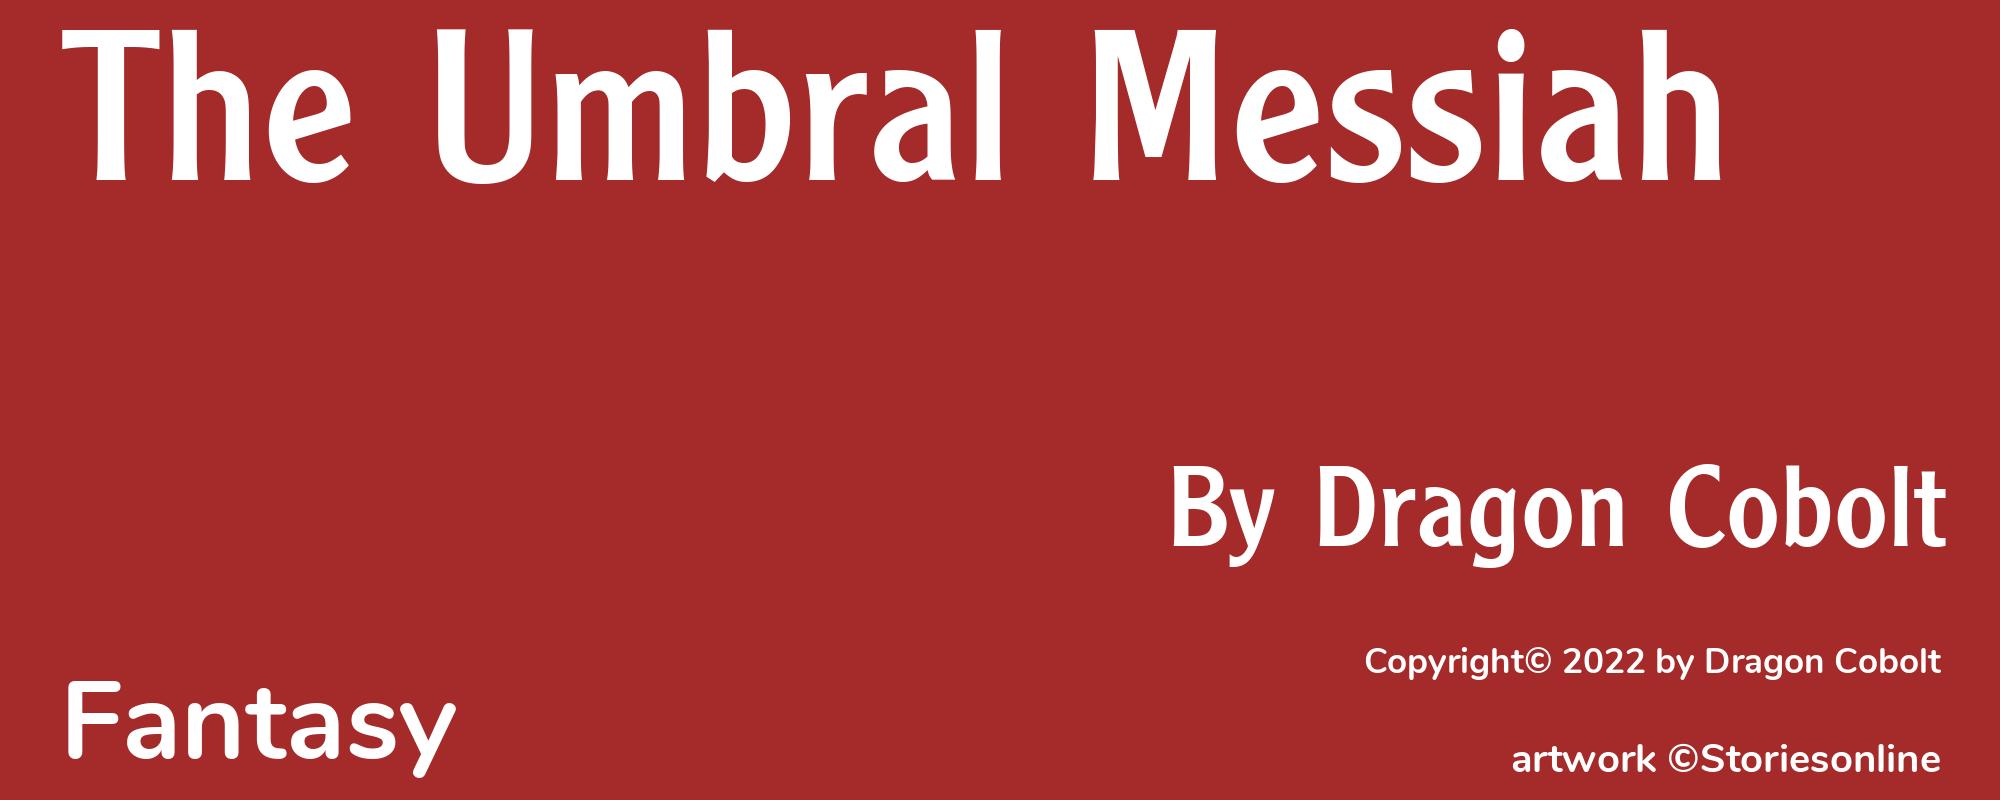 The Umbral Messiah - Cover